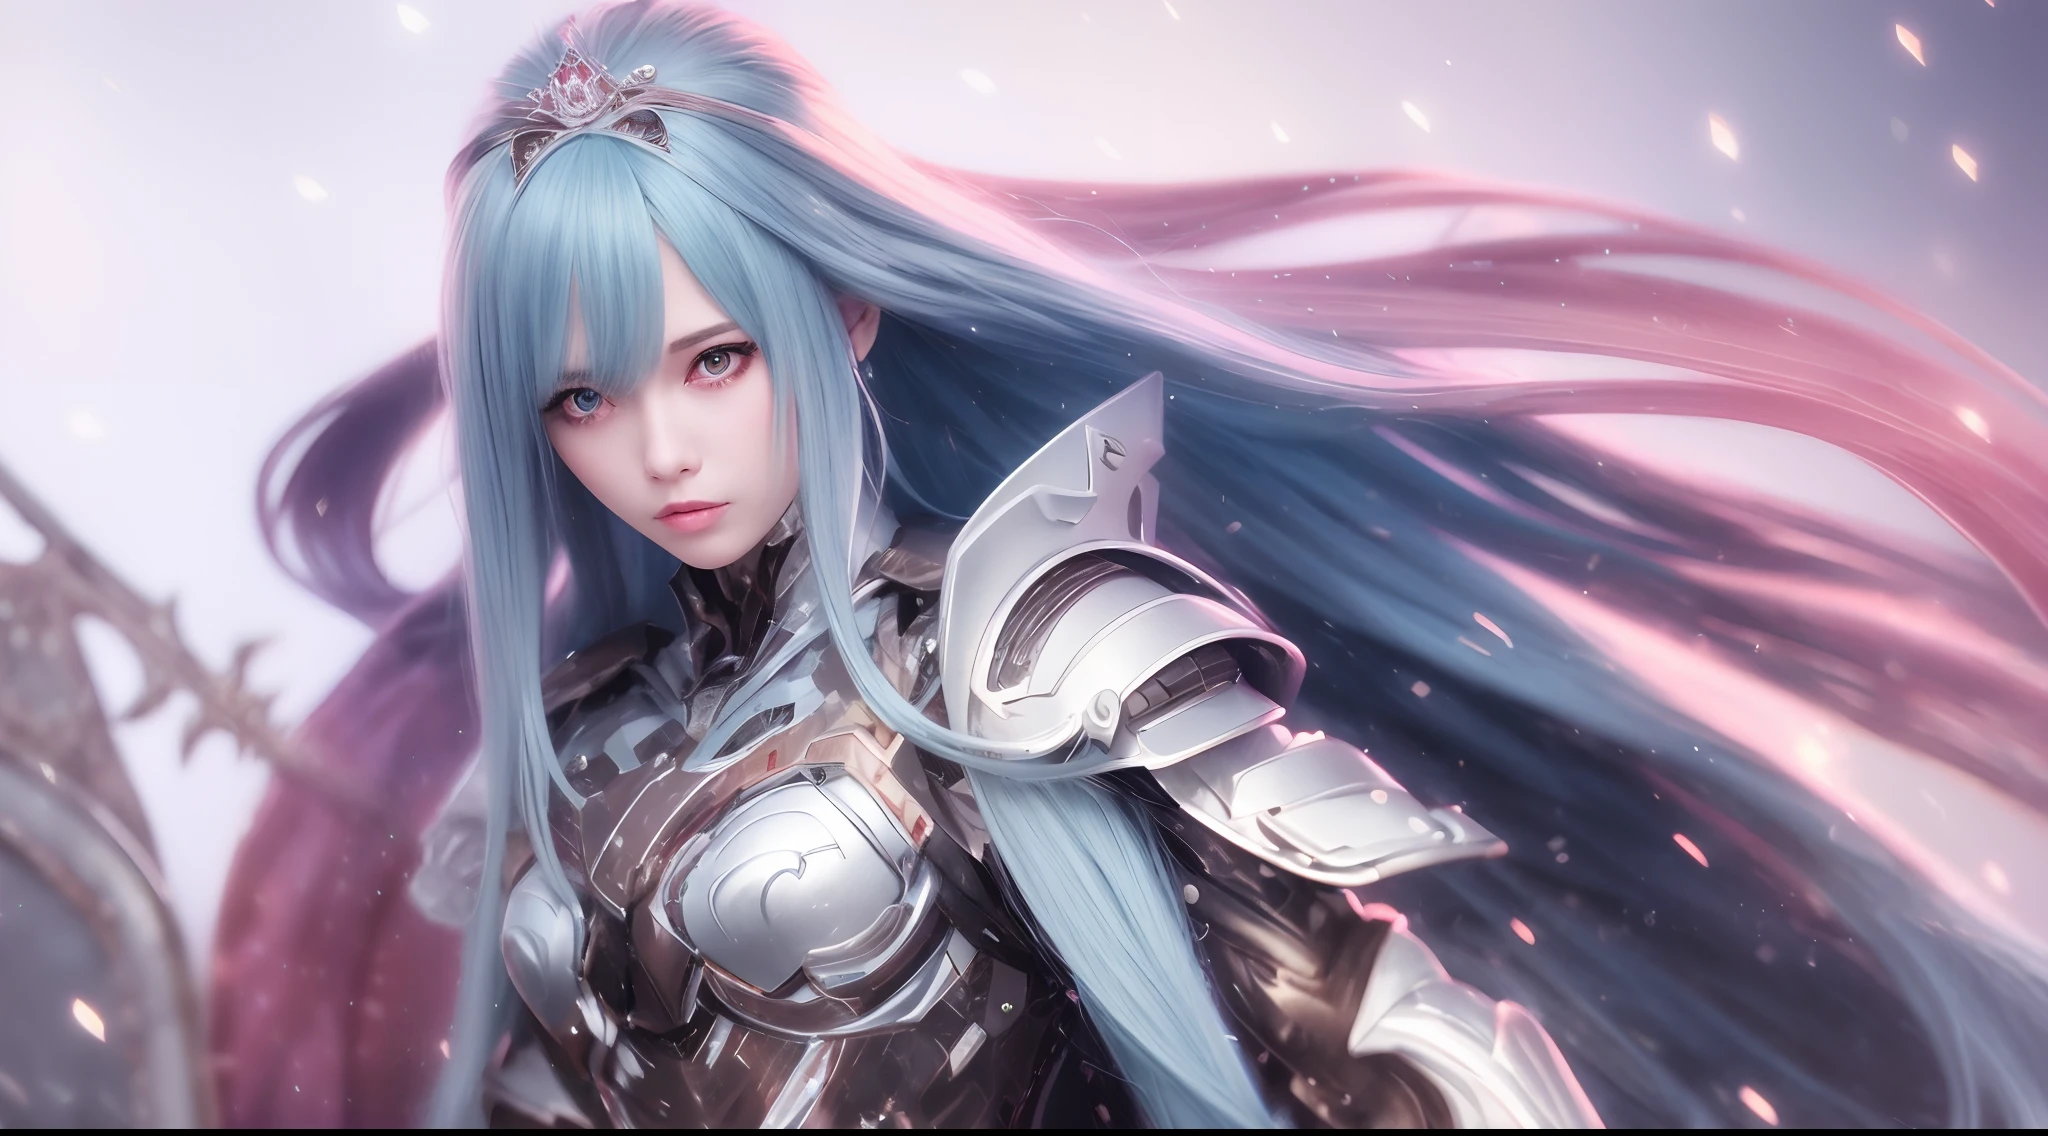 Gray hair, blue color eyes, Red eyeshadow, ssmile, slightly red face, Feminine expression, The delicate face shape is perfectly described, Eye-shaped necklace, Mecha armor，Clear lines, White gloveetal streamers, Metallic glossy wing，Wielding a shining thunder sword，Best photo quality, 16K High Resolution, Colored inner hair, Inner dyeing asymmetrical hairstyleAsymmetrical hairstyle, Side drill single-sided drill bit roll, hyper HD